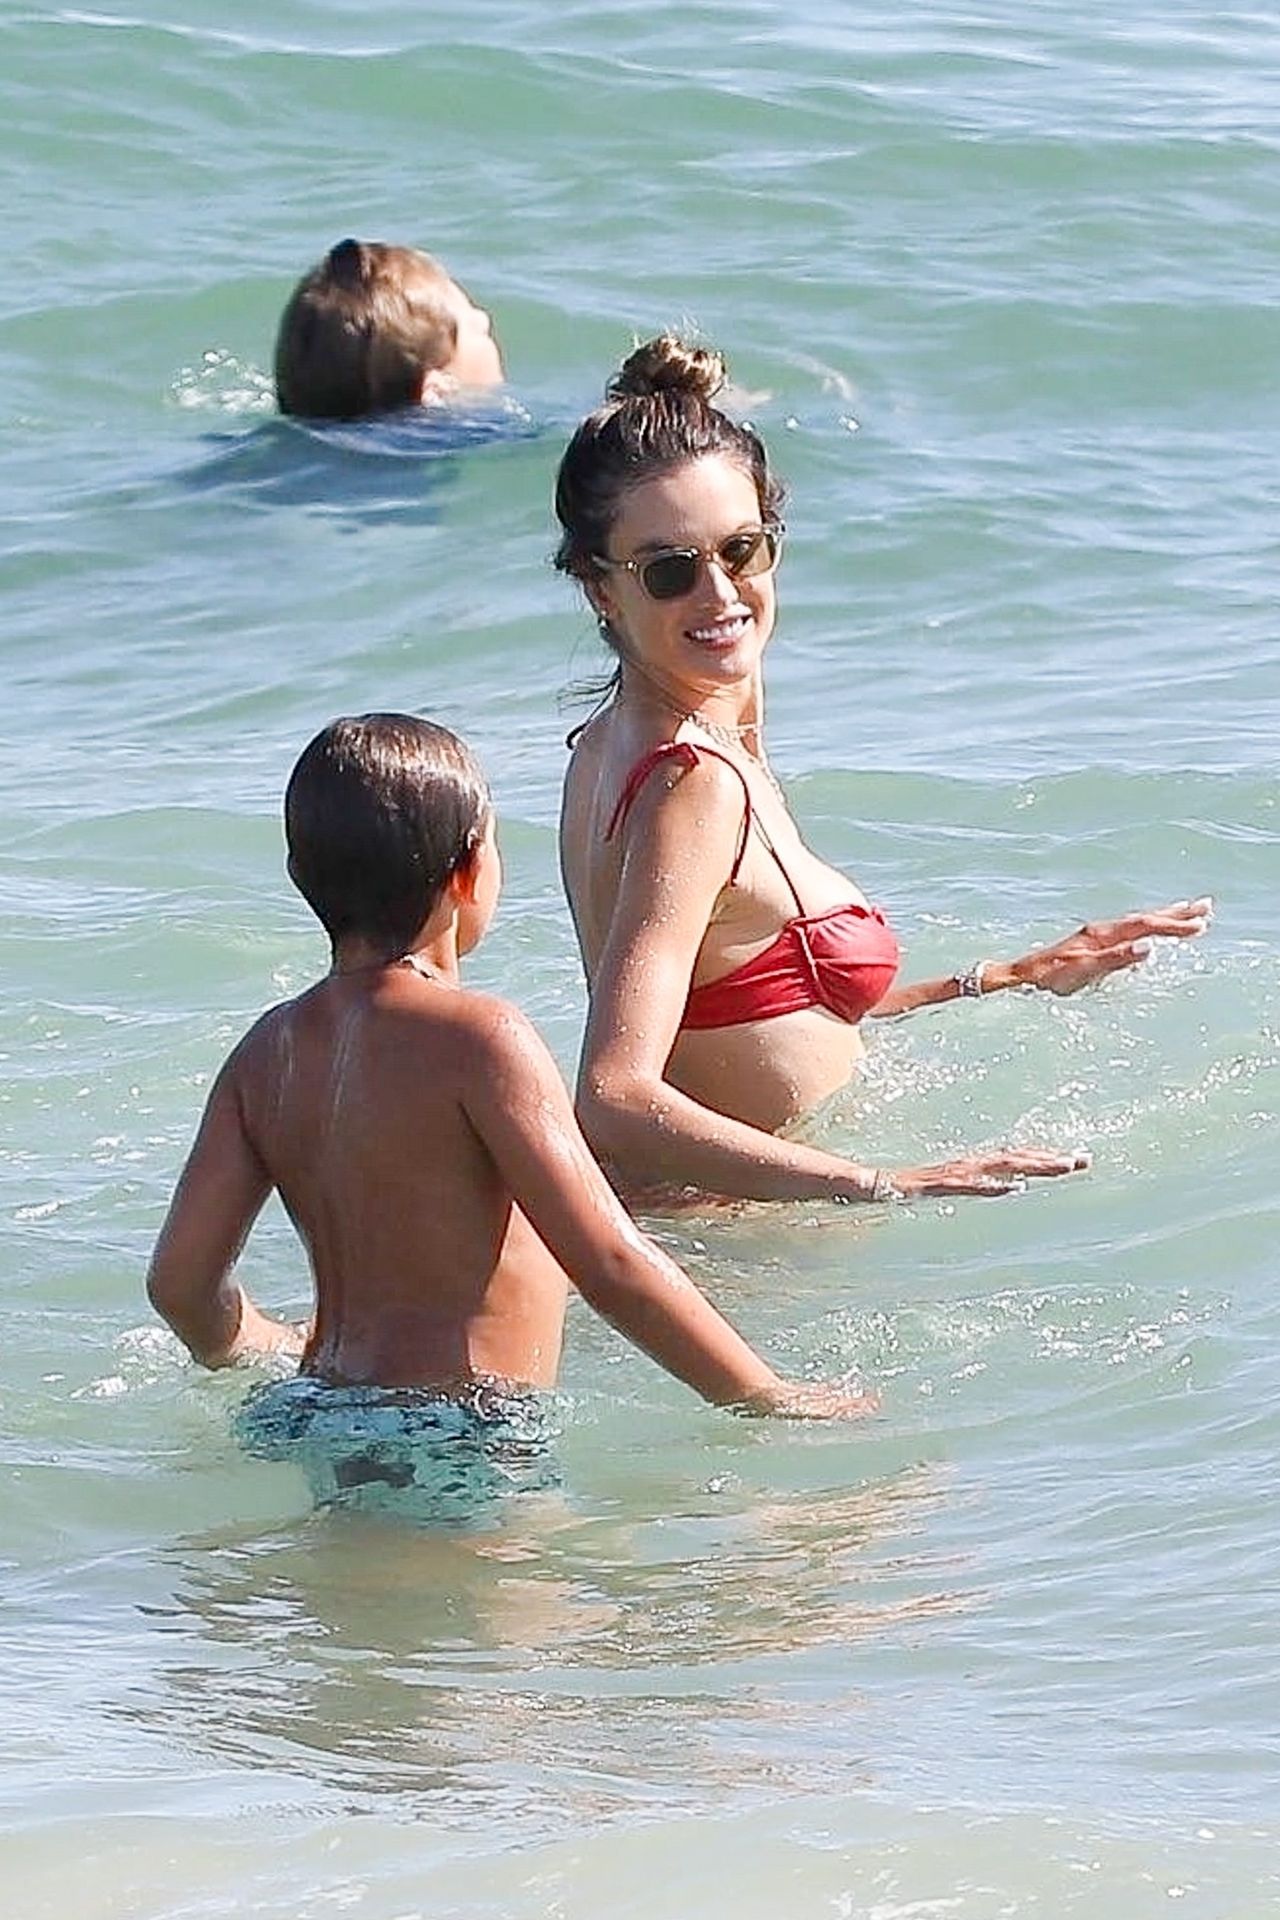 Alessandra Ambrosio Stuns in a Red Bikini While Cooling Off at the Beach (97 Photos)